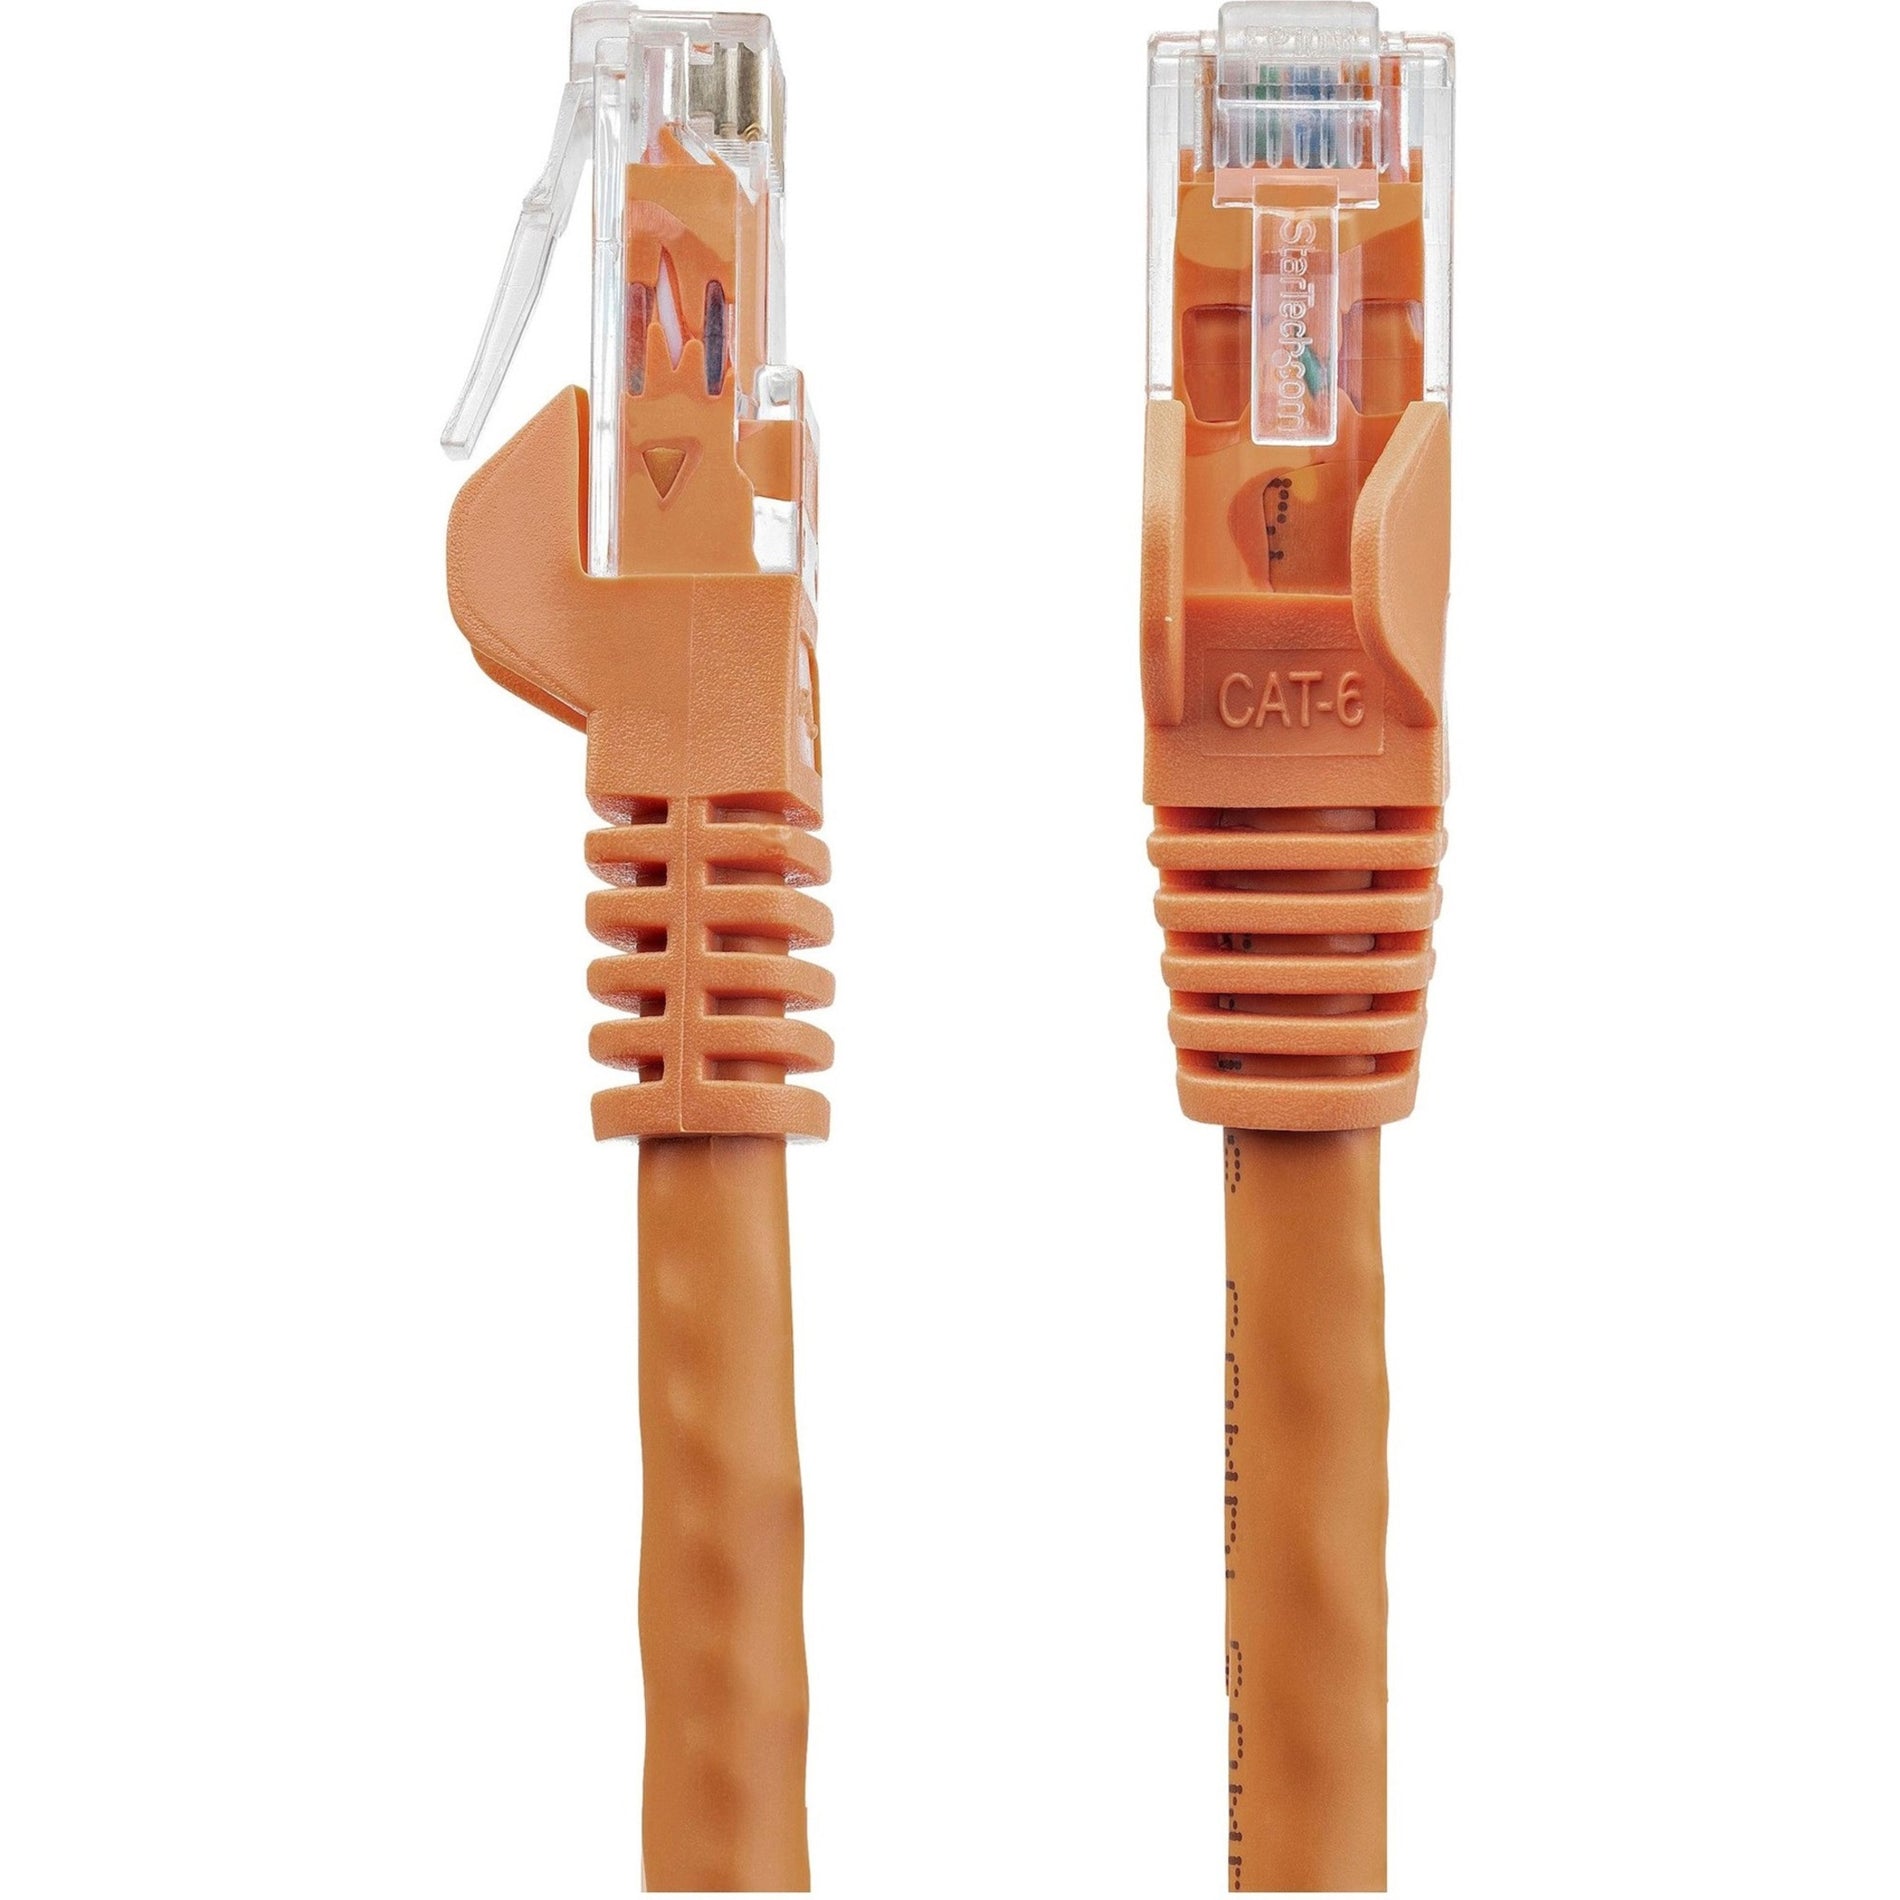 StarTech.com N6PATCH20OR Cat. 6 Network Cable 20ft Orange Ethernet Cable Snagless RJ45 Connectors  スタートゥック・ドットコム N6PATCH20OR Cat. 6 ネットワークケーブル、20フィート オレンジ イーサネットケーブル、スナッグレス RJ45 コネクタ